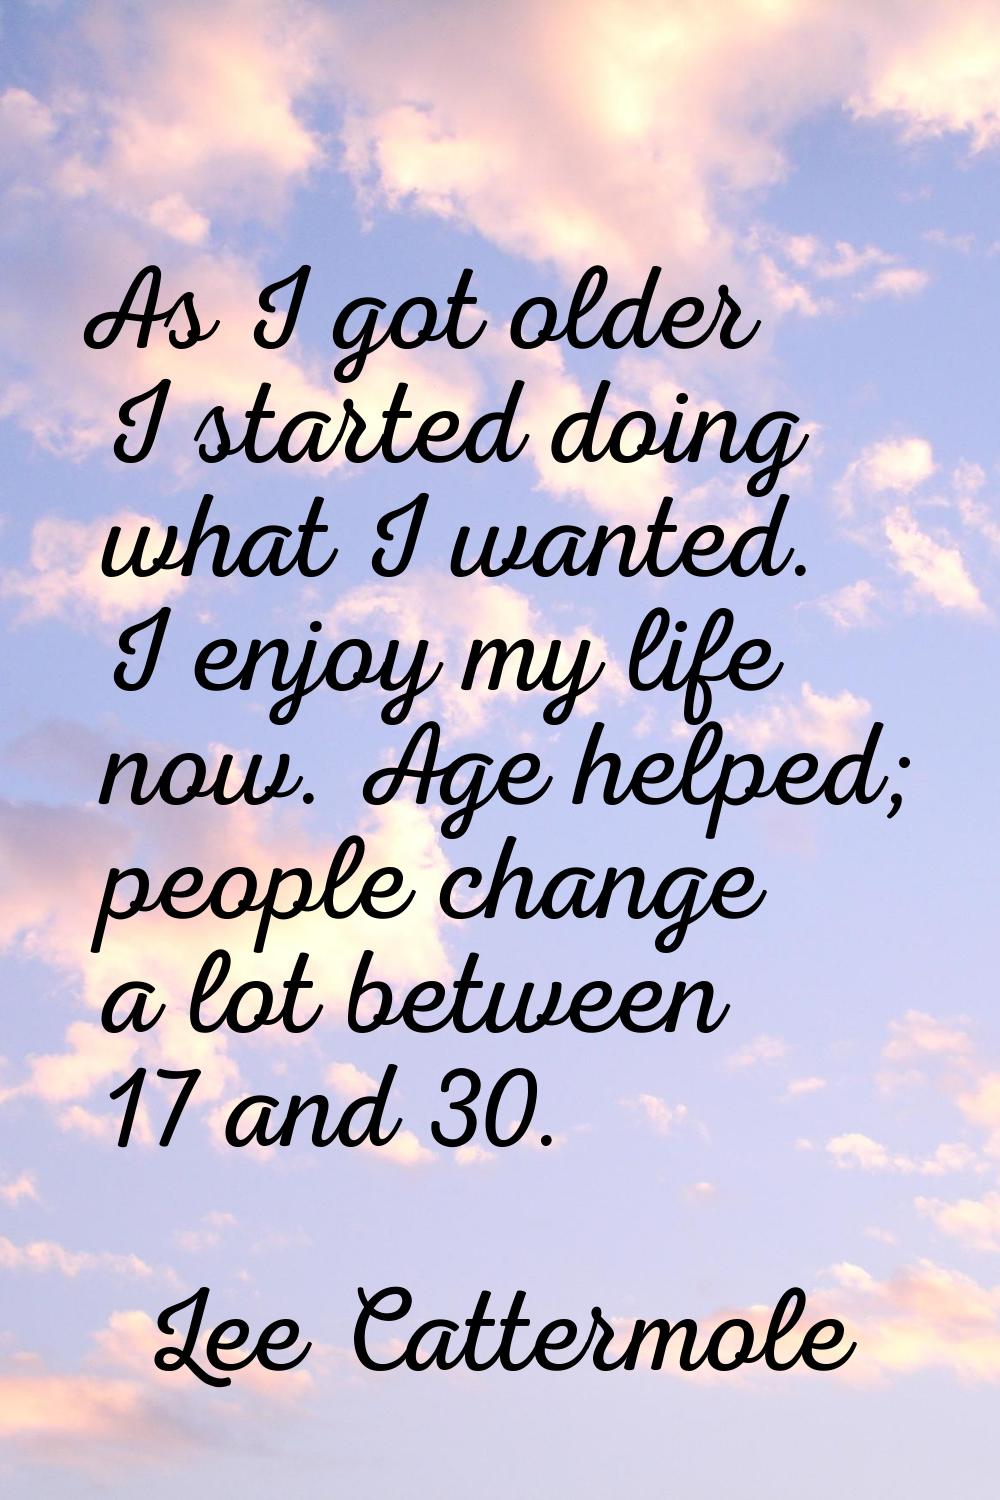 As I got older I started doing what I wanted. I enjoy my life now. Age helped; people change a lot 